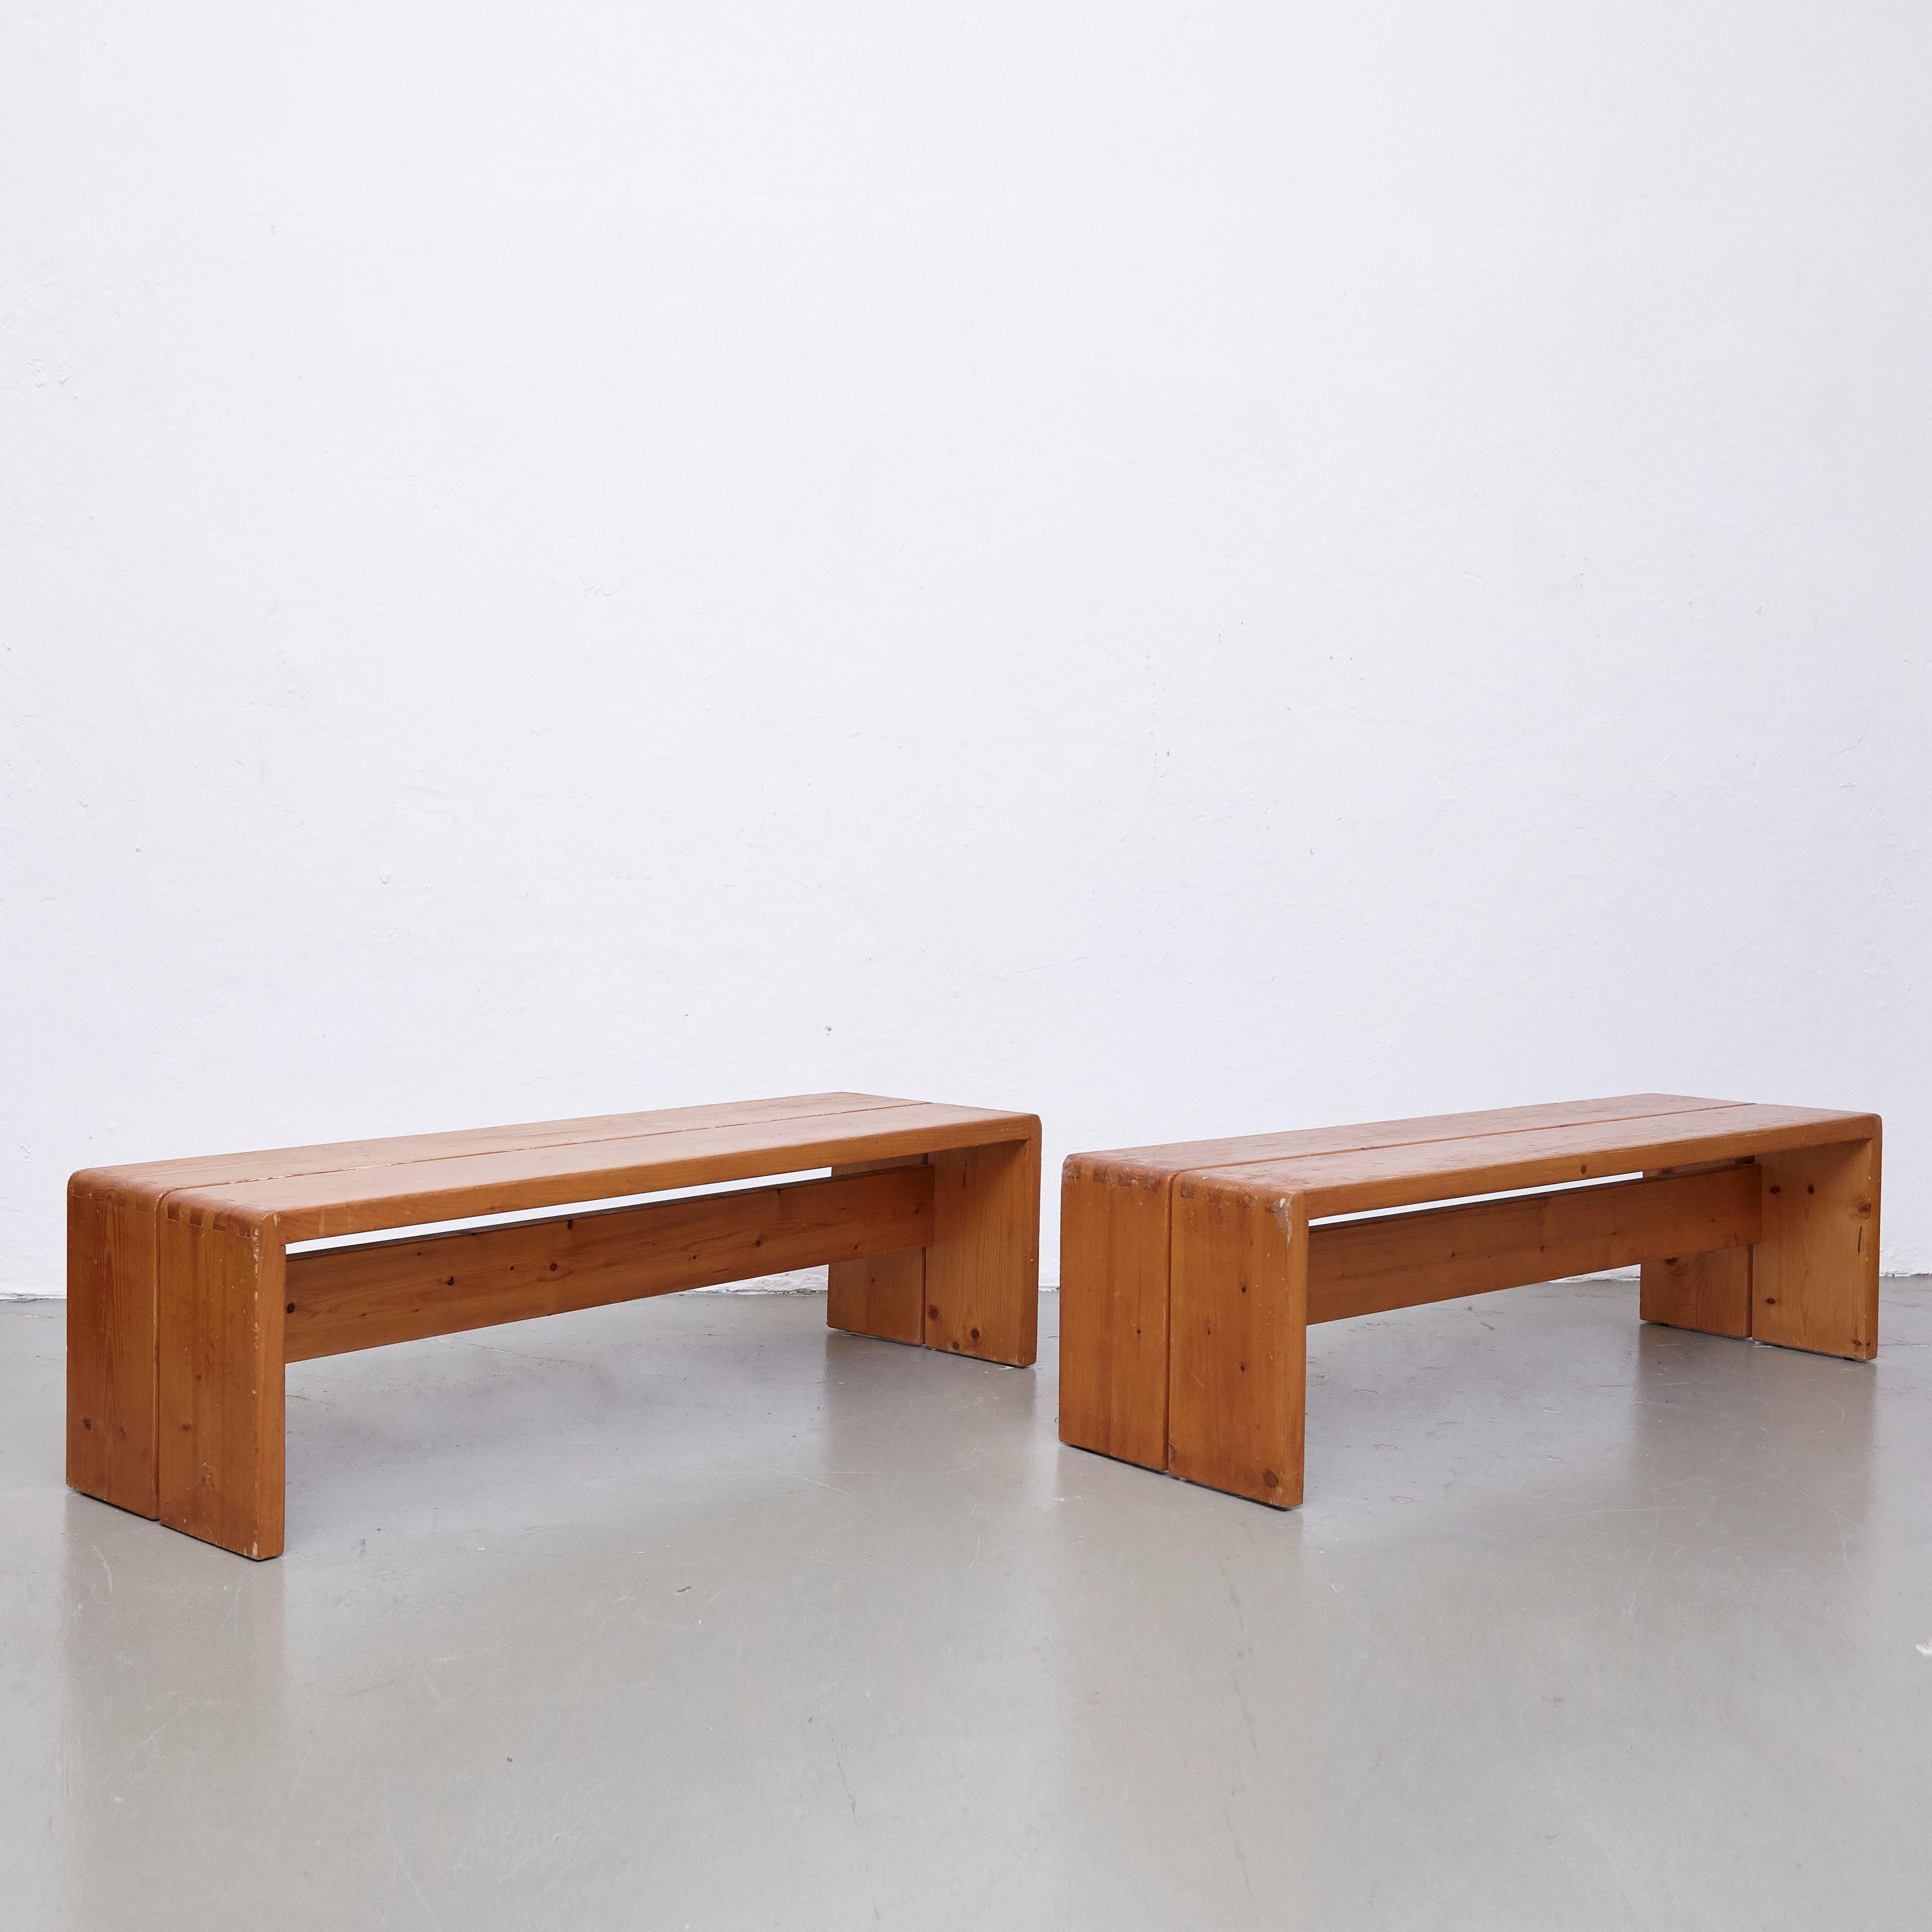 Benches designed by Charlotte Perriand for Les Arcs ski resort, circa 1960, manufactured in France.
Pinewood.

In original condition, with wear consistent with age and use, preserving a beautiful patina.

Charlotte Perriand (1903-1999) She was